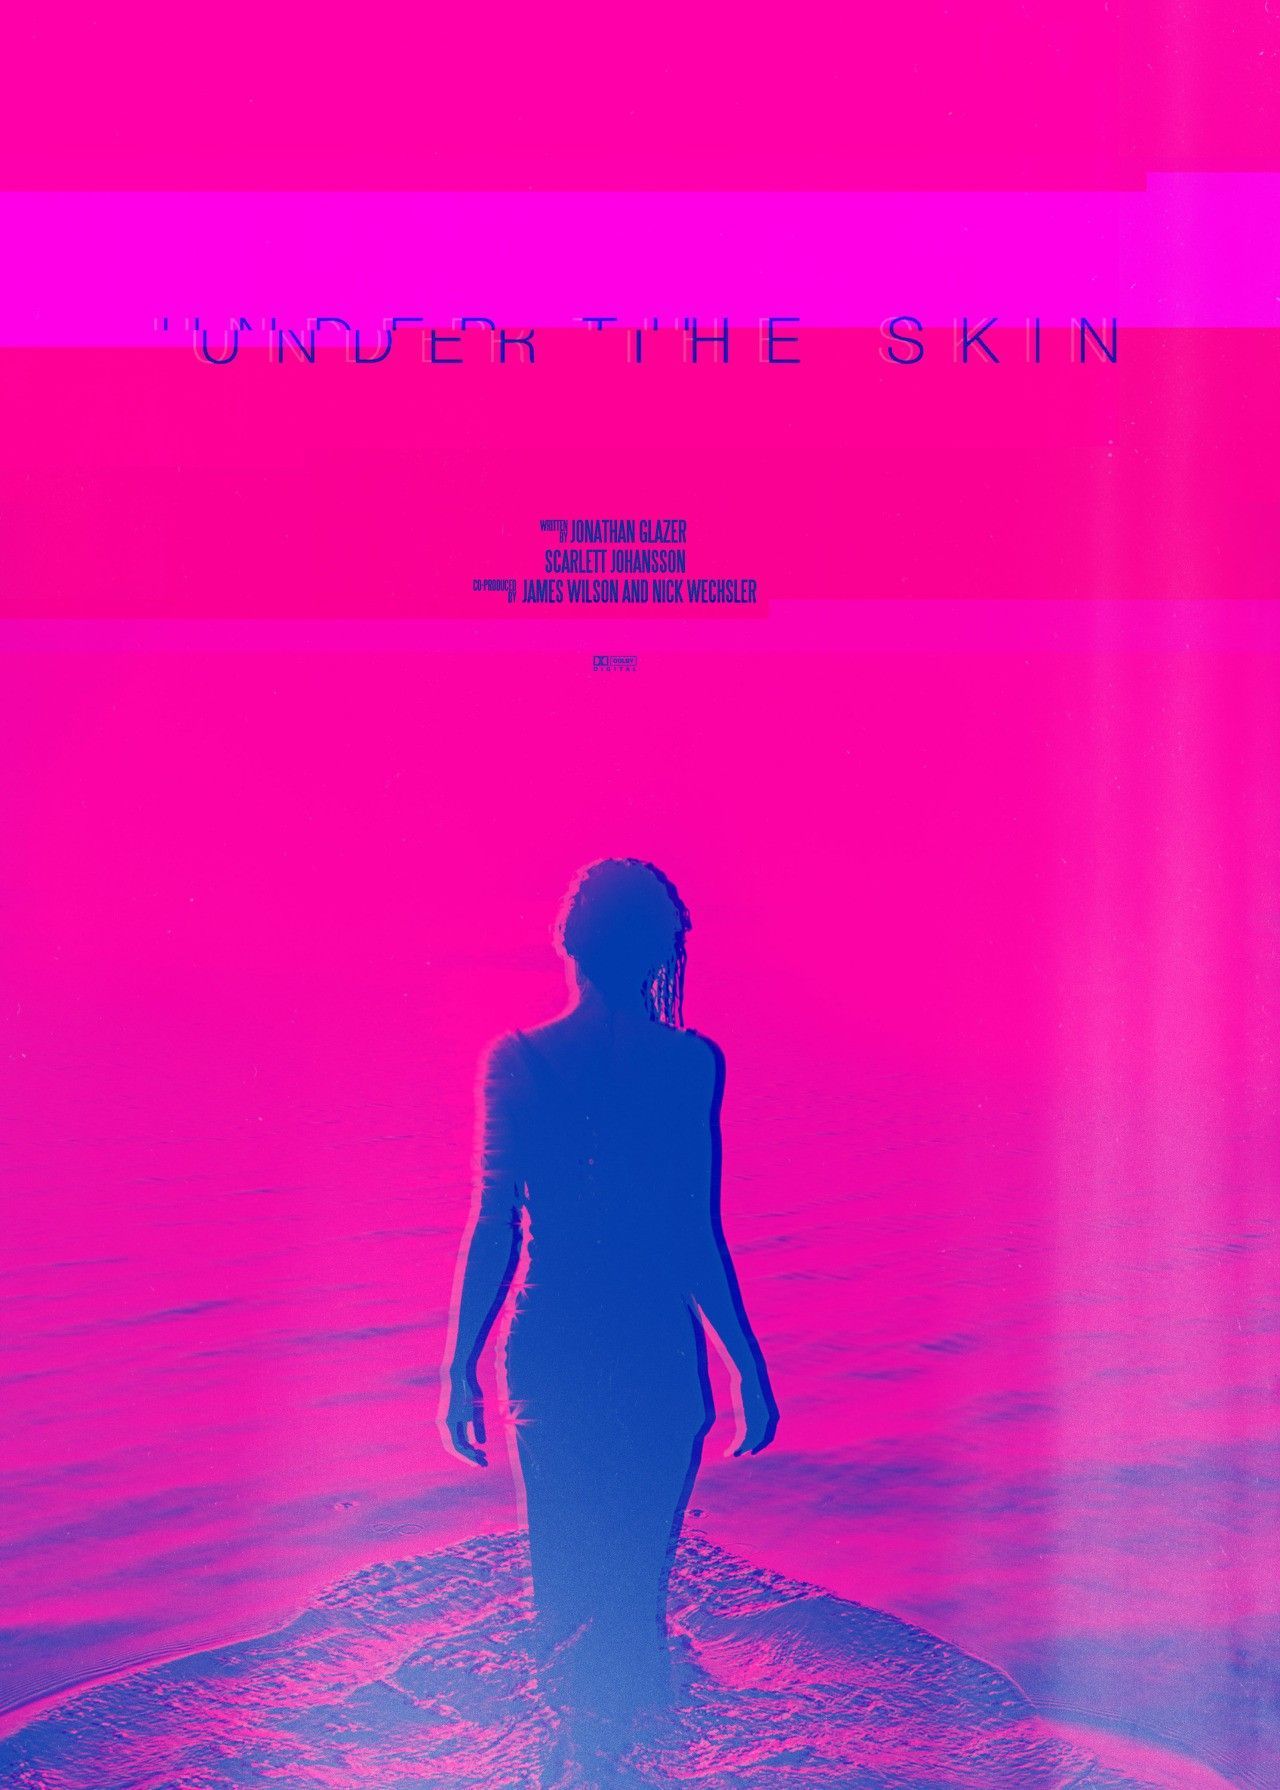 Under the Skin (2013) [1280 x 1790] HD Wallpaper From Gallsource